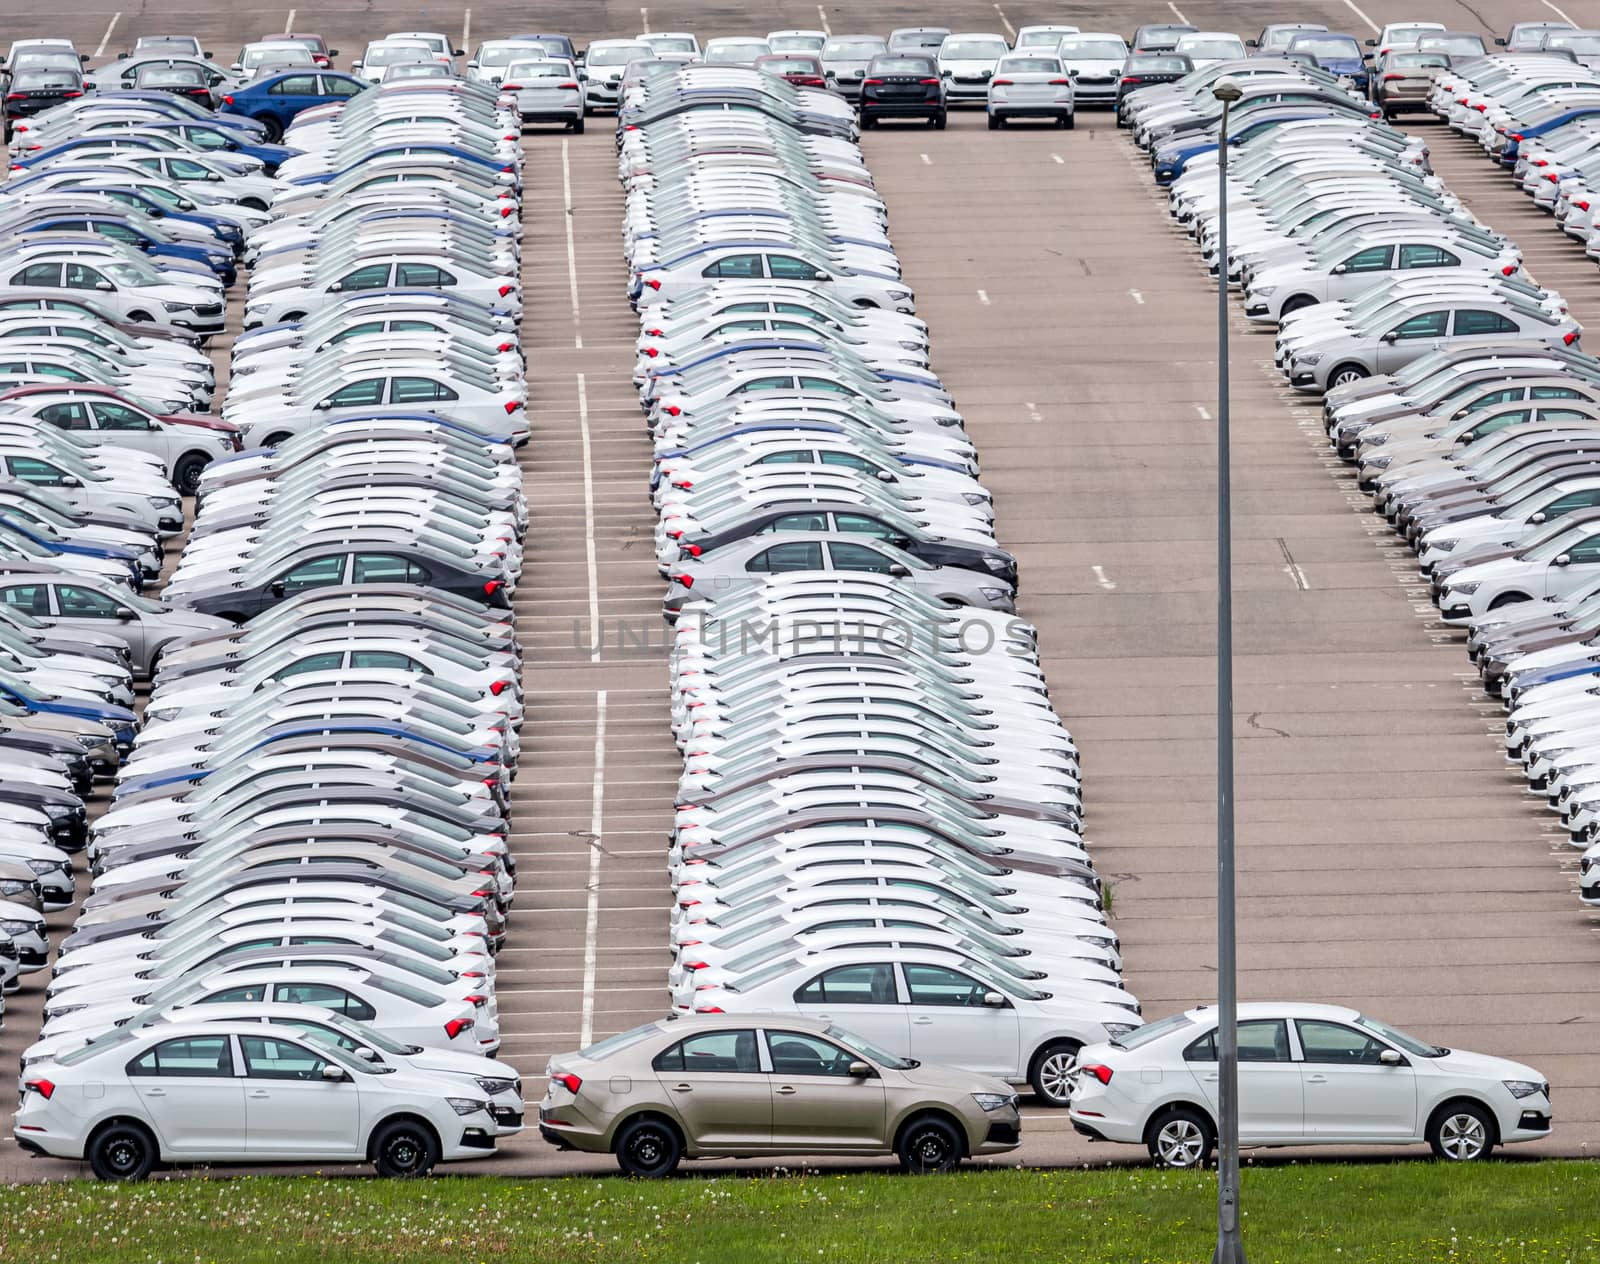 Rows of a new cars parked in a distribution center on a car factory on a cloudy day. Top view to the parking in the open air.